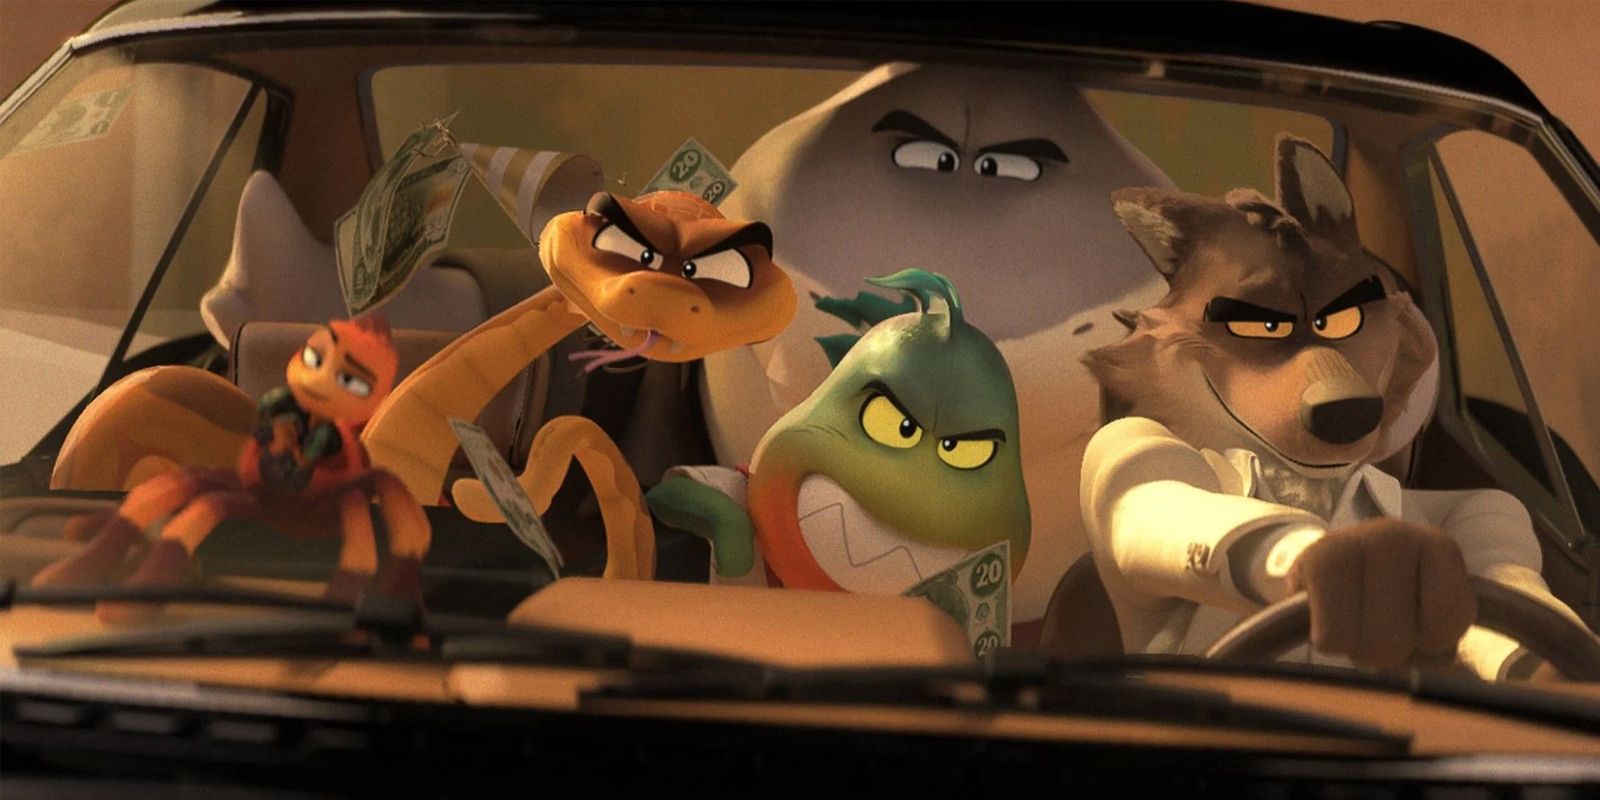 The Bad Guys driving a car